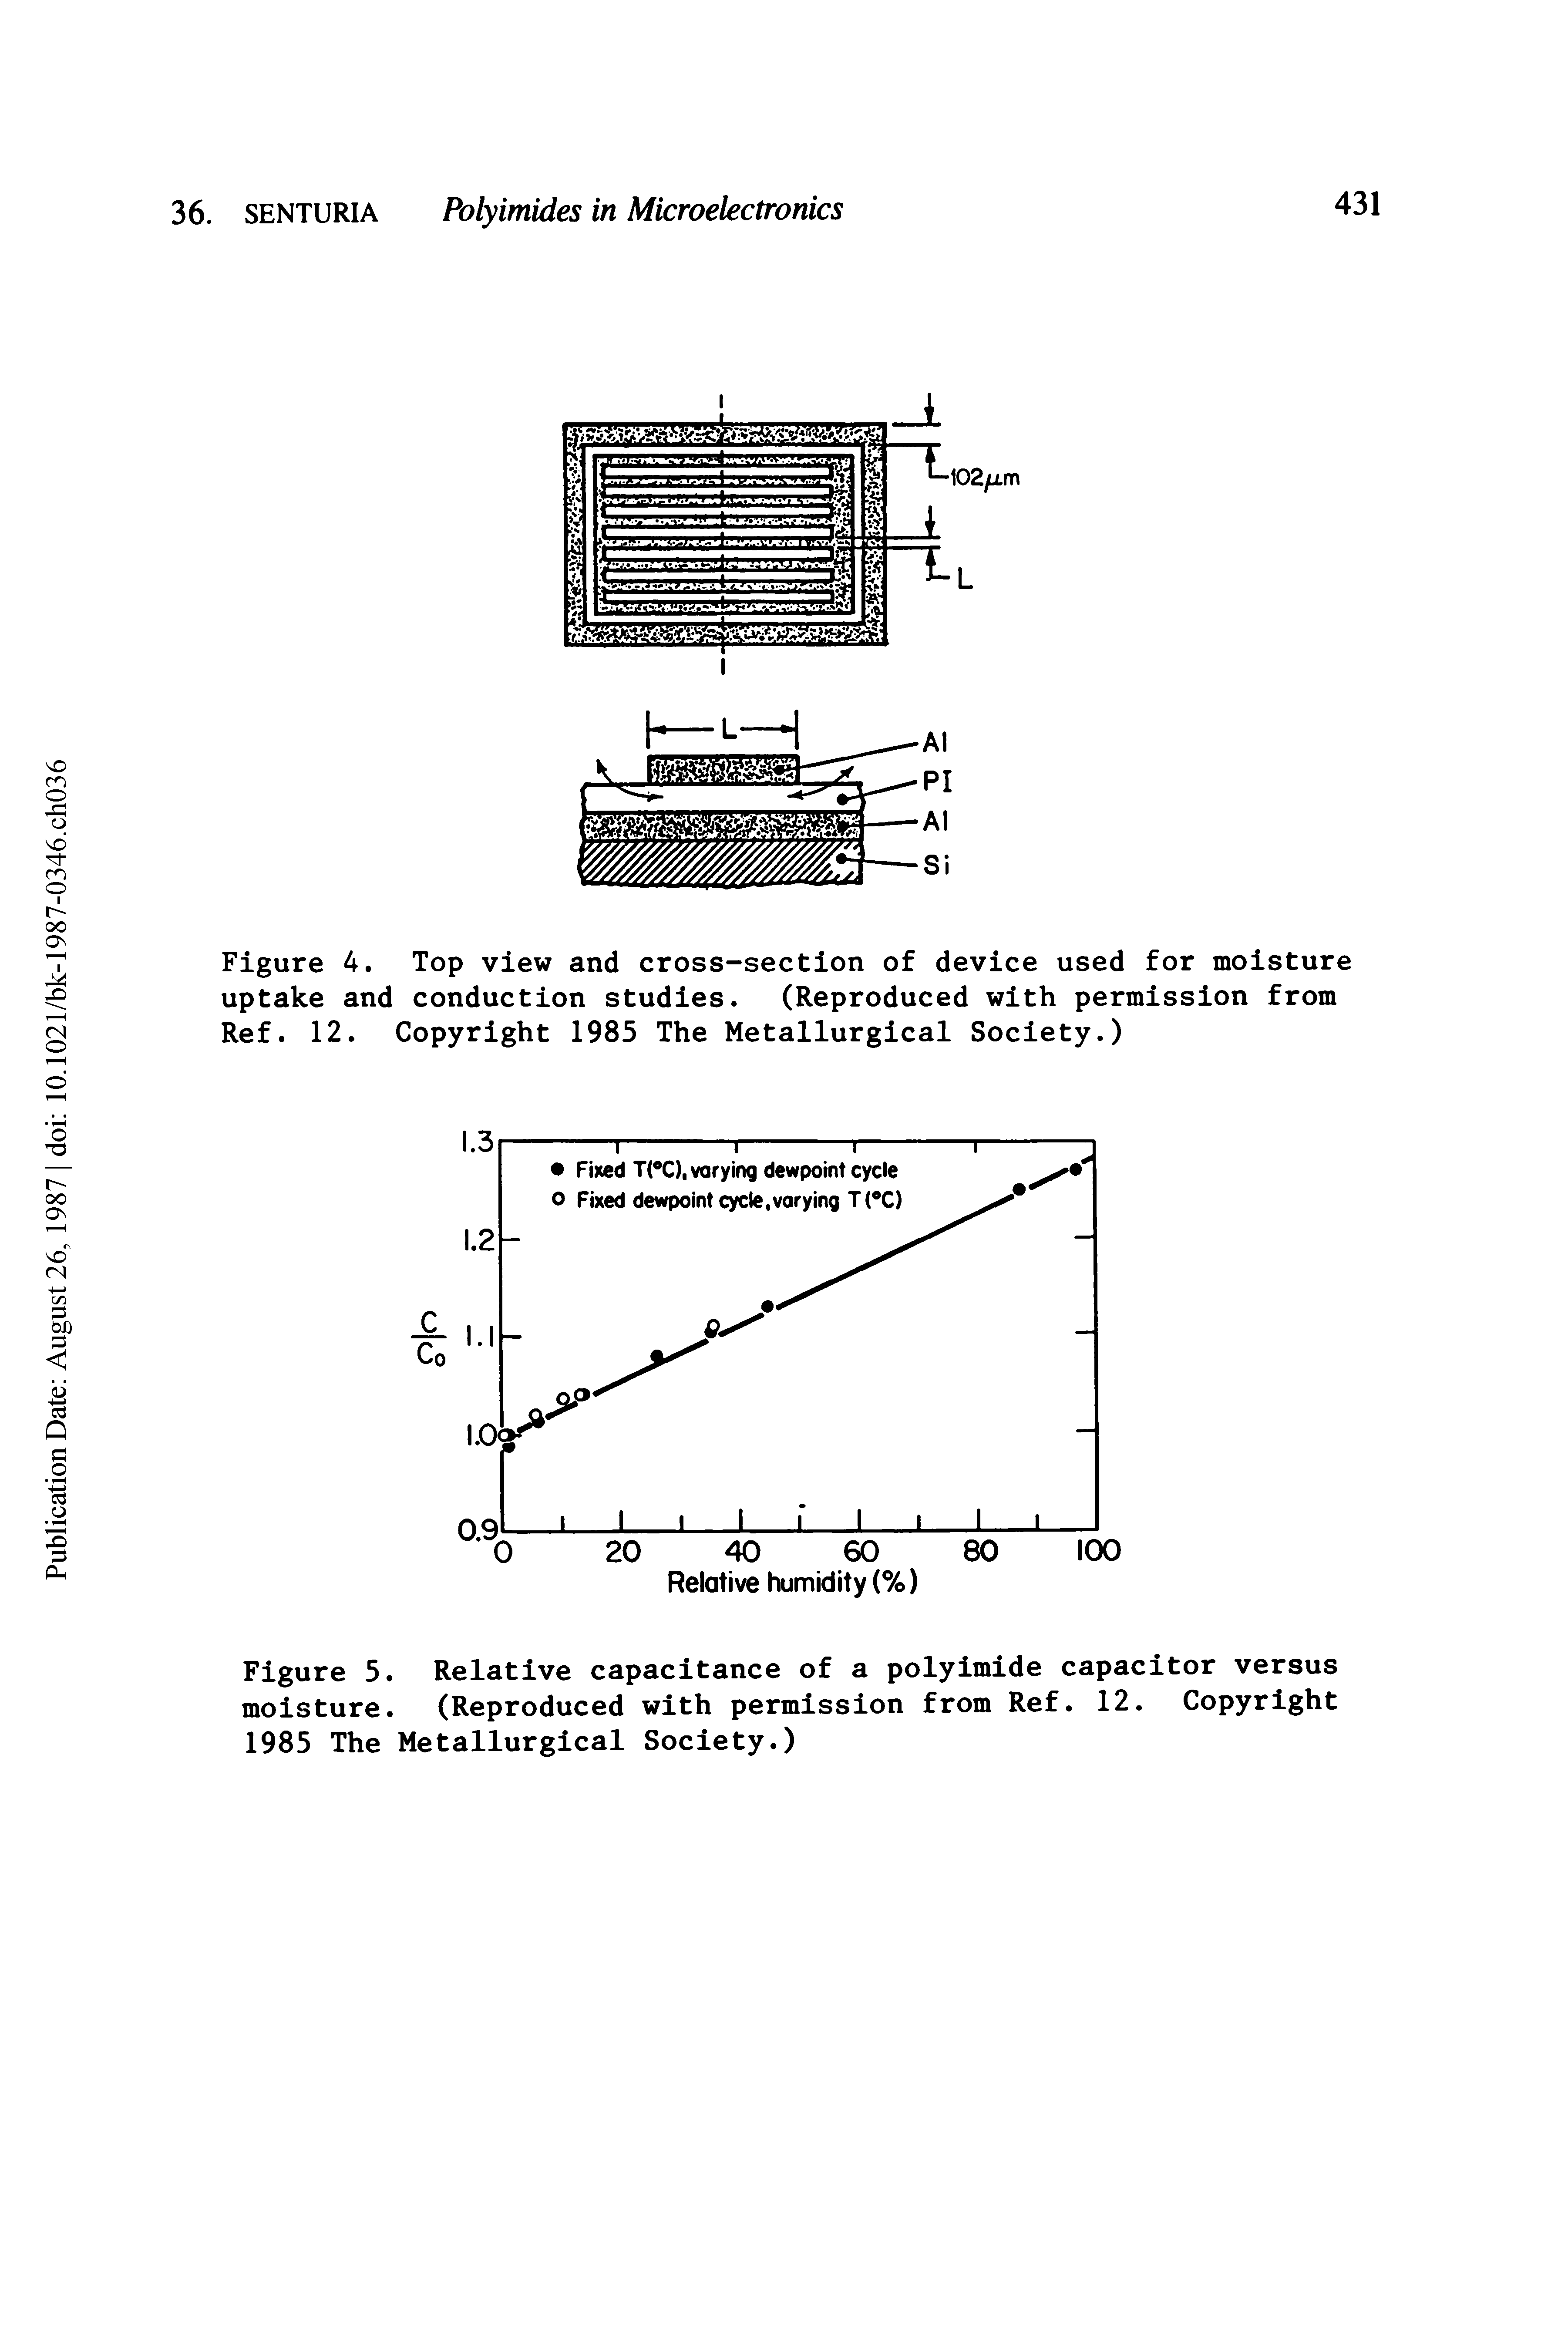 Figure 5. Relative capacitance of a polyimide capacitor versus moisture. (Reproduced with permission from Ref. 12. Copyright 1985 The Metallurgical Society.)...